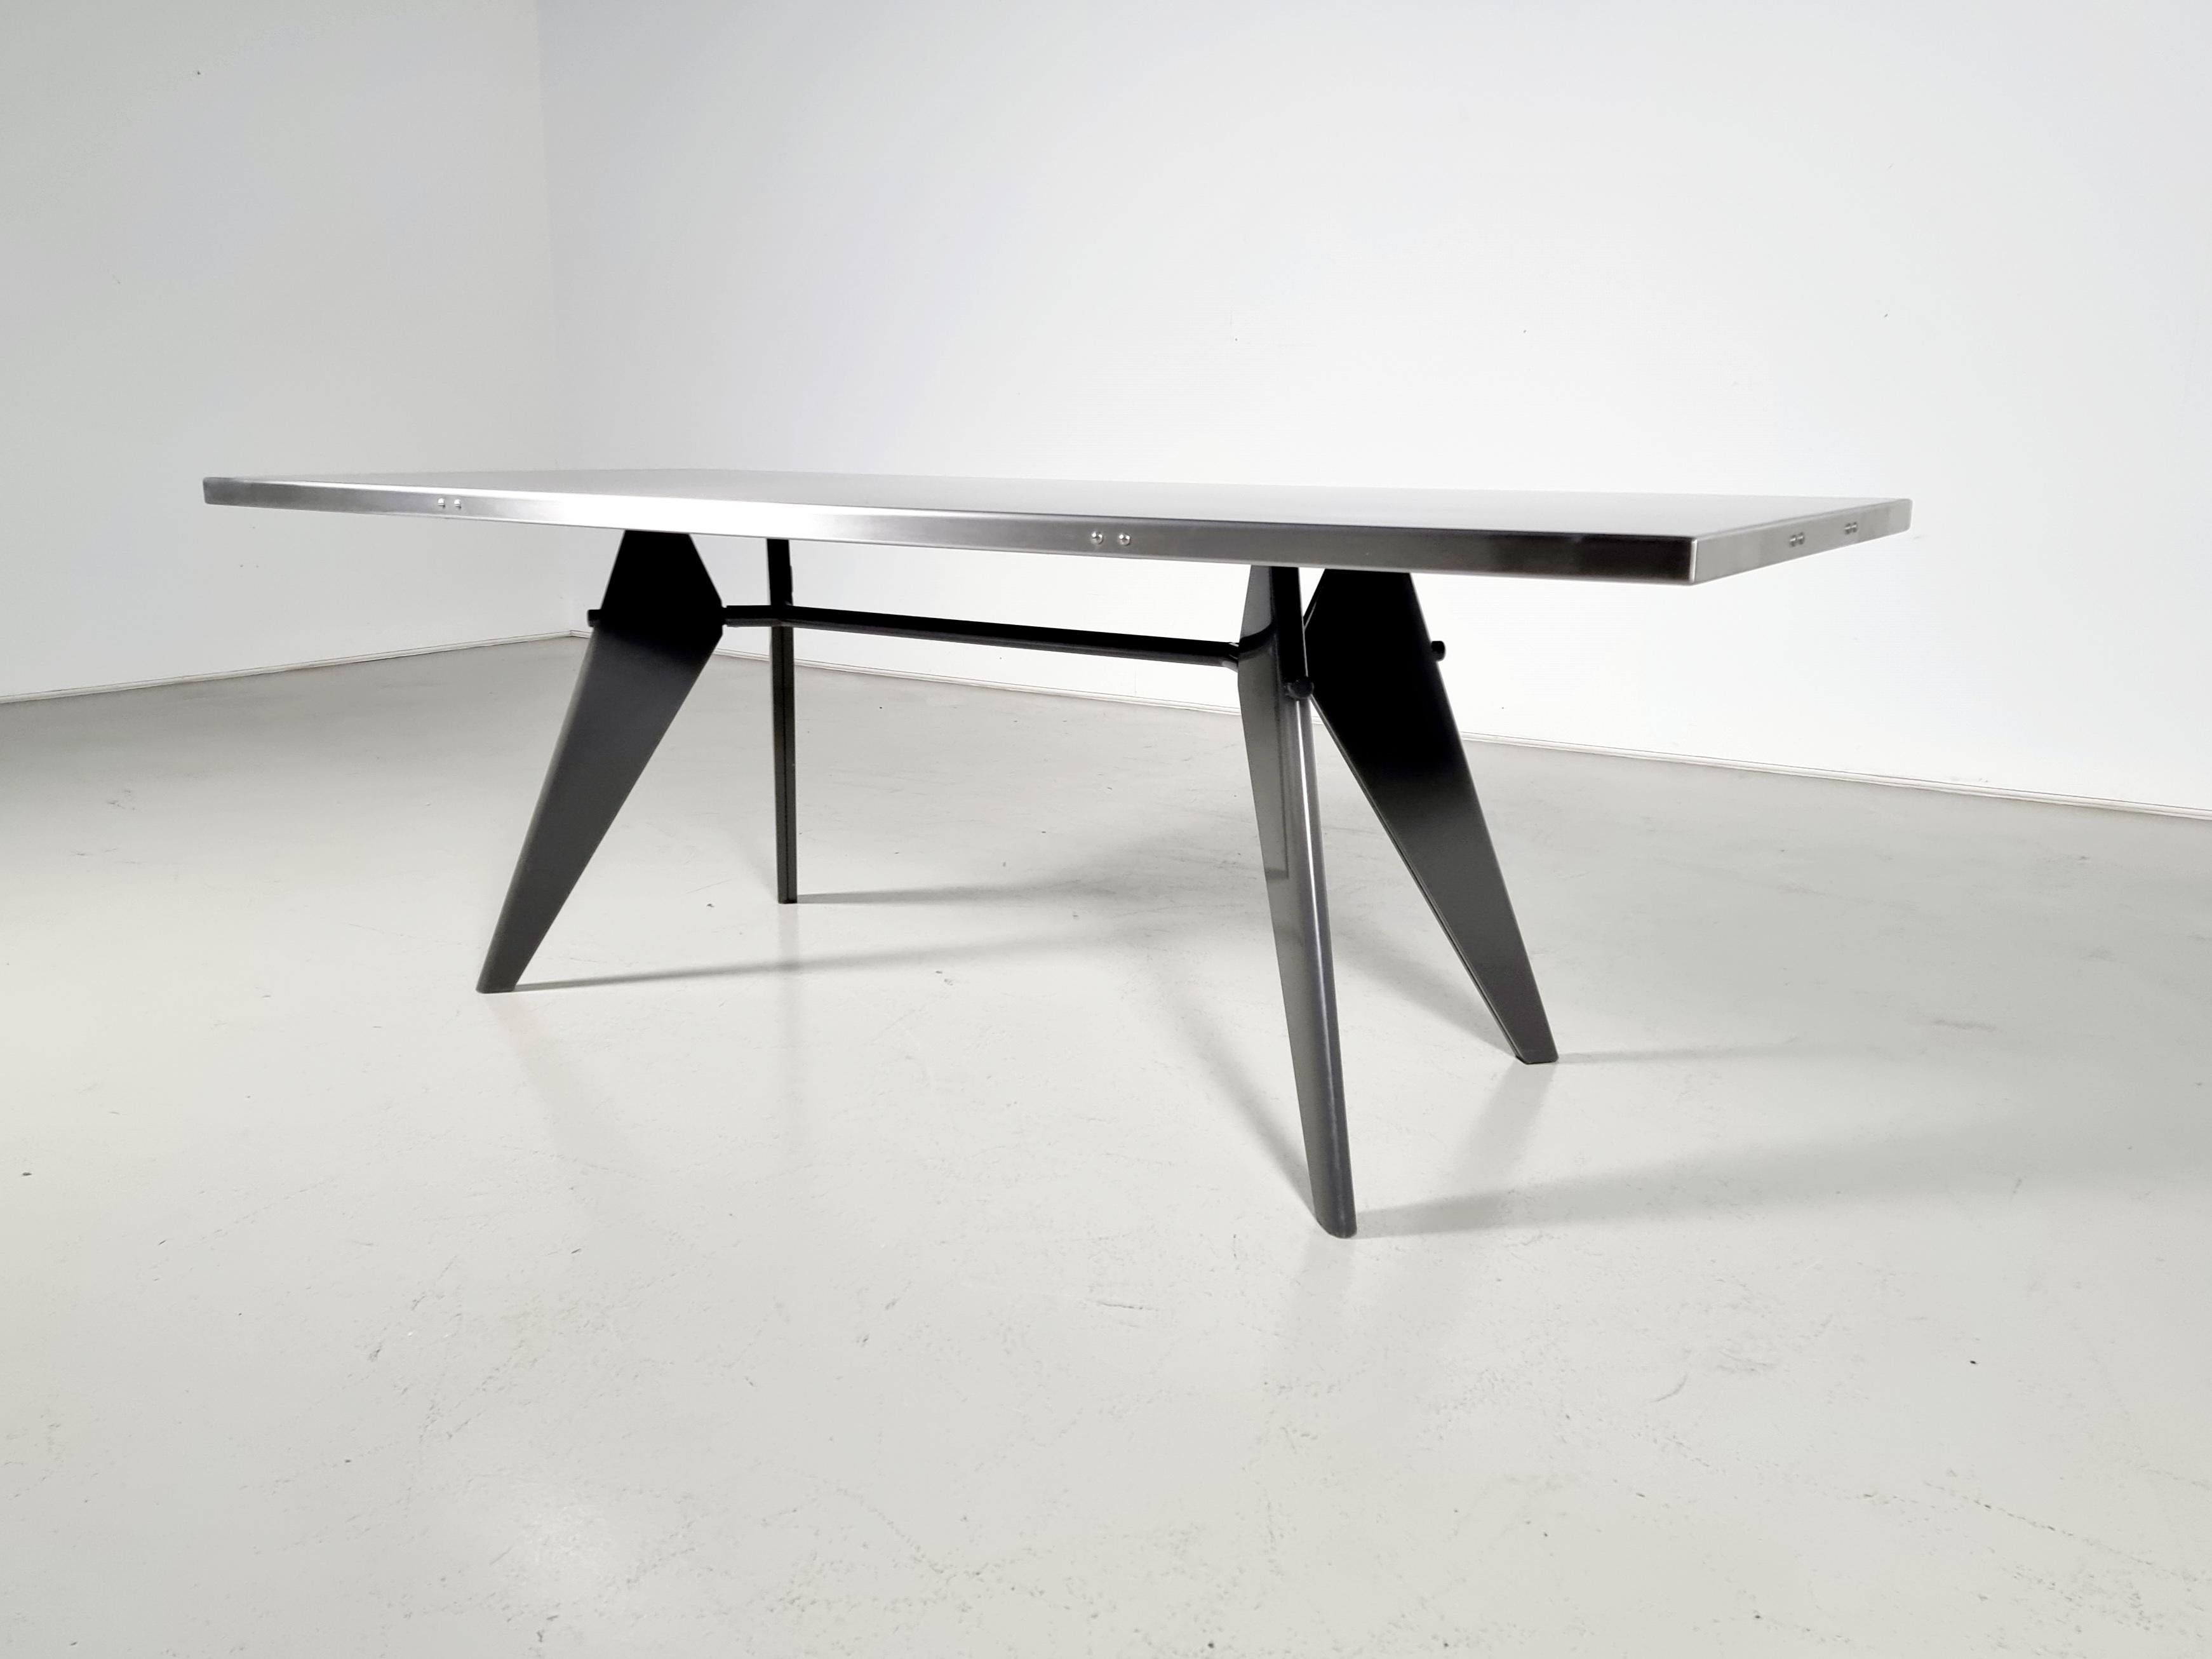 Jean Prouve by G-Star Raw for Vitra S.A.M. Tropique Table with matching chairs For Sale 1